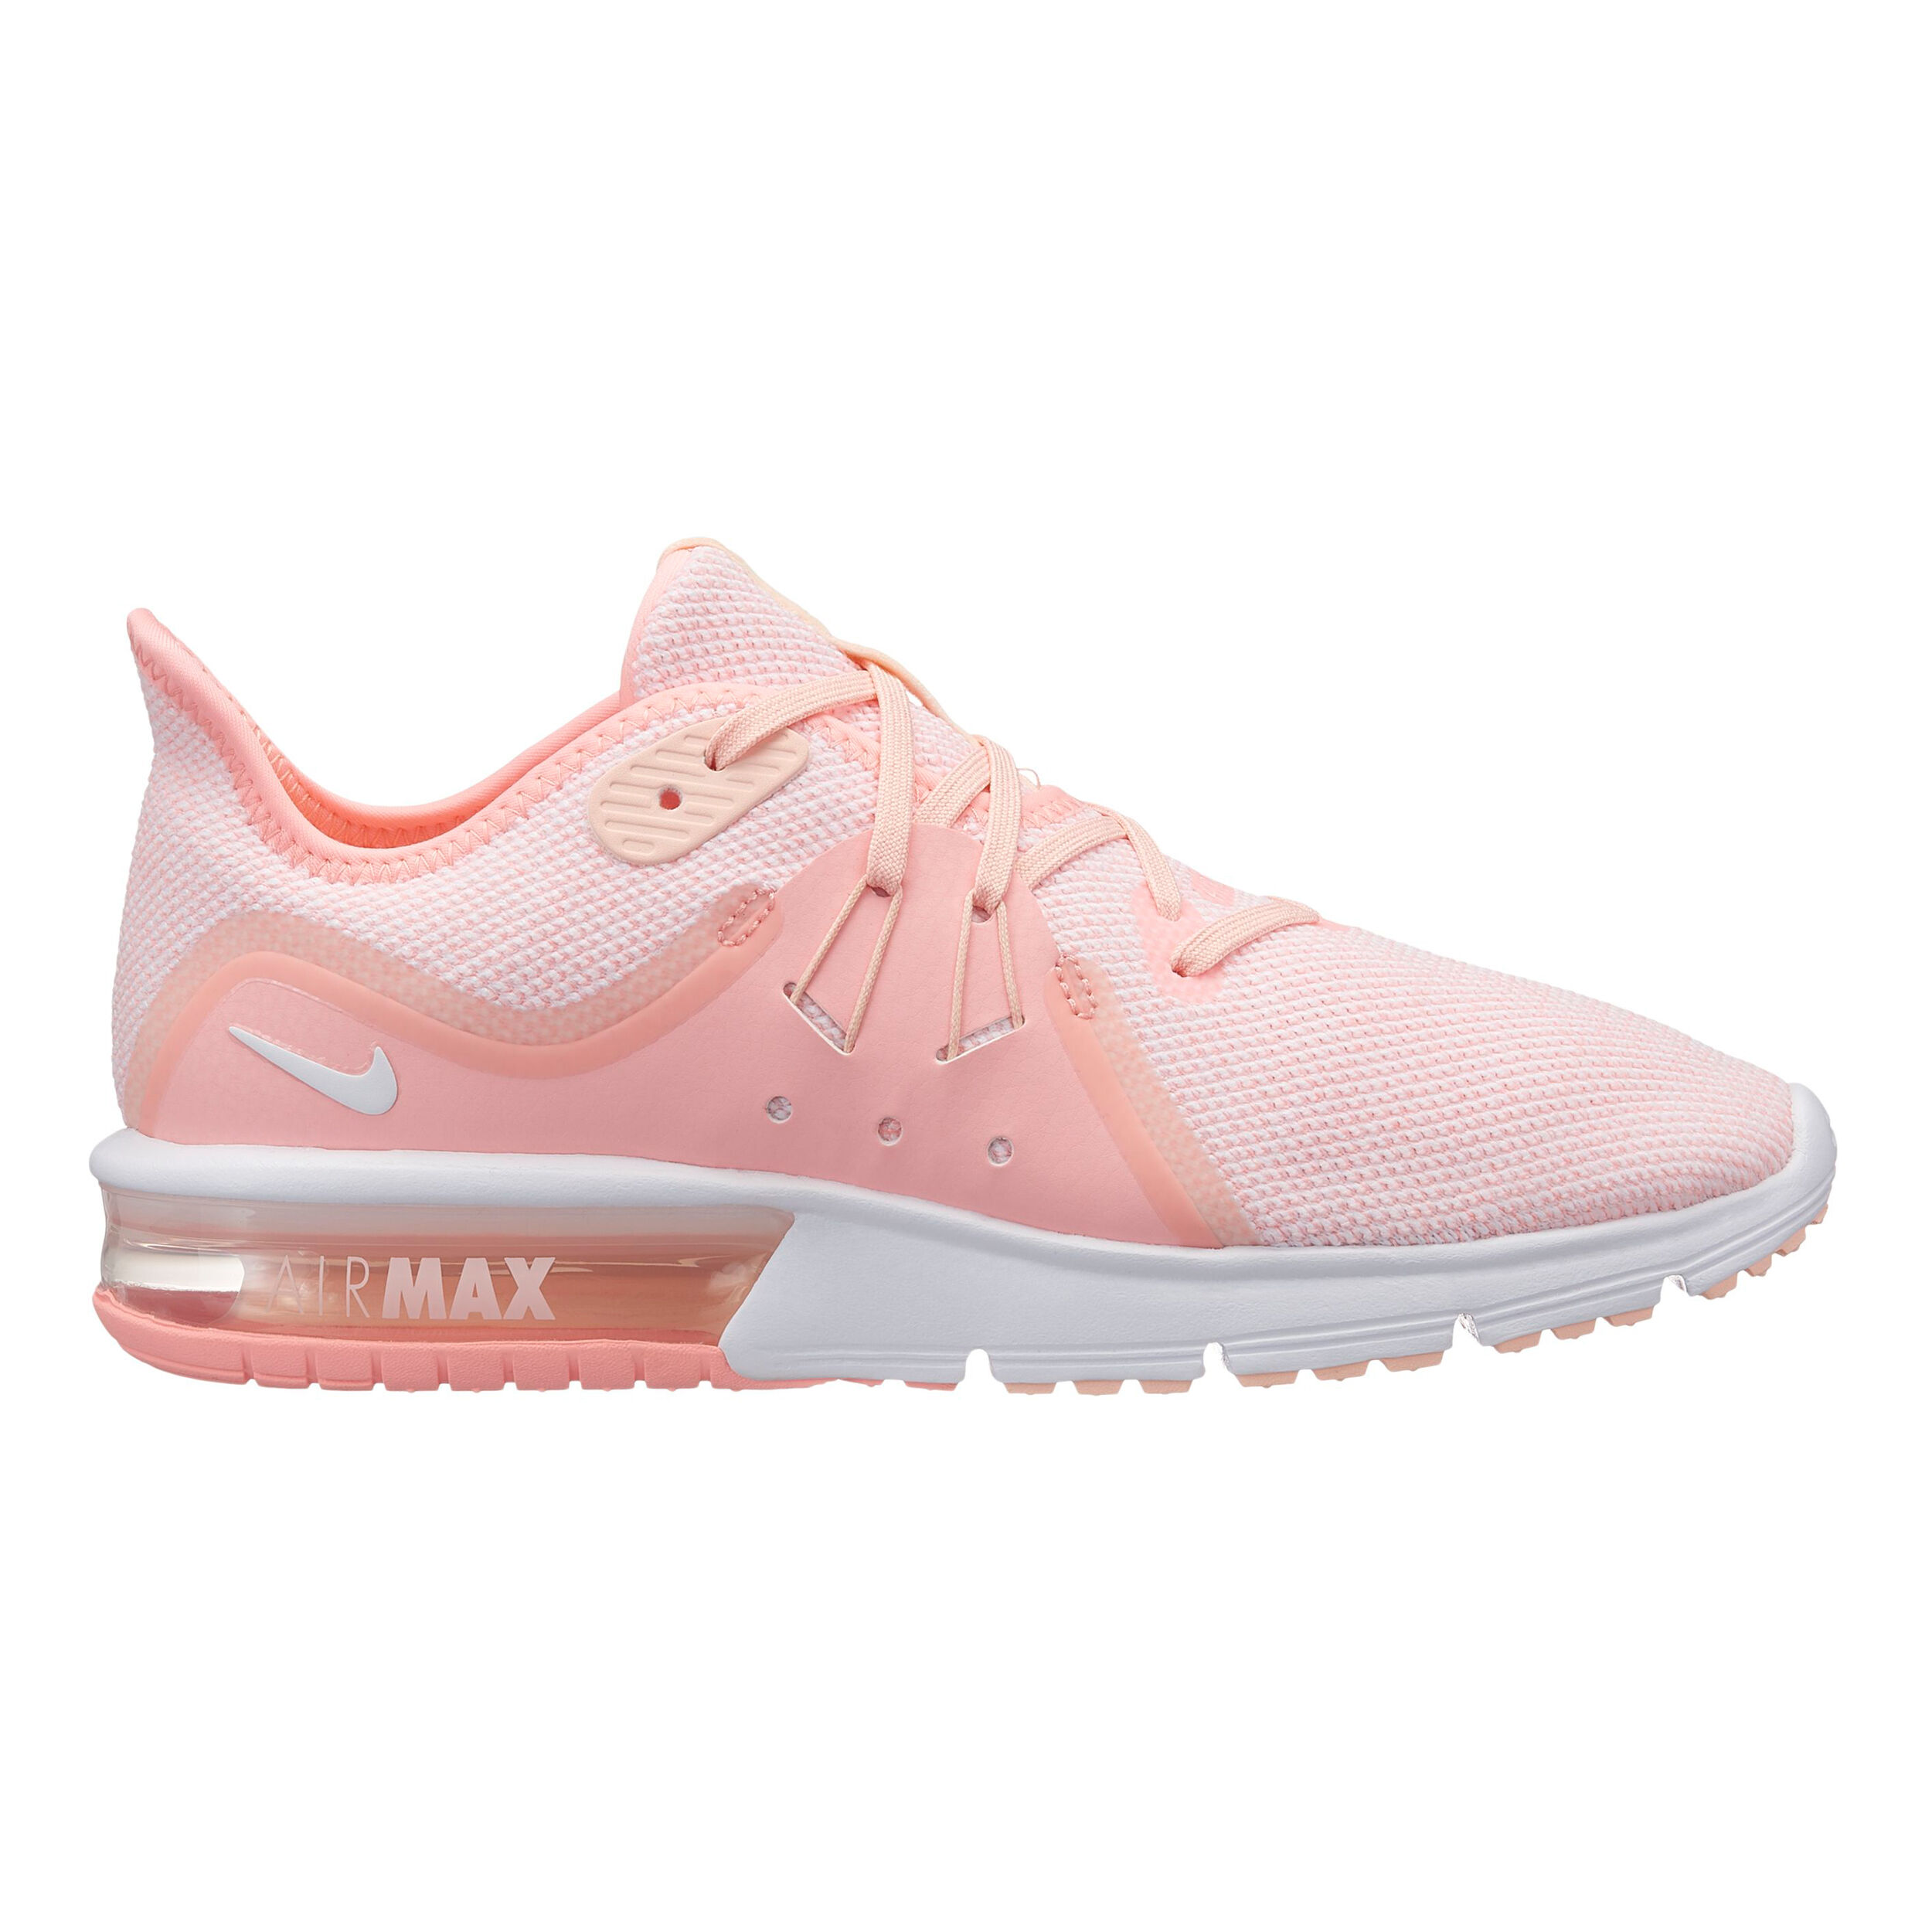 nike air max sequent women's pink